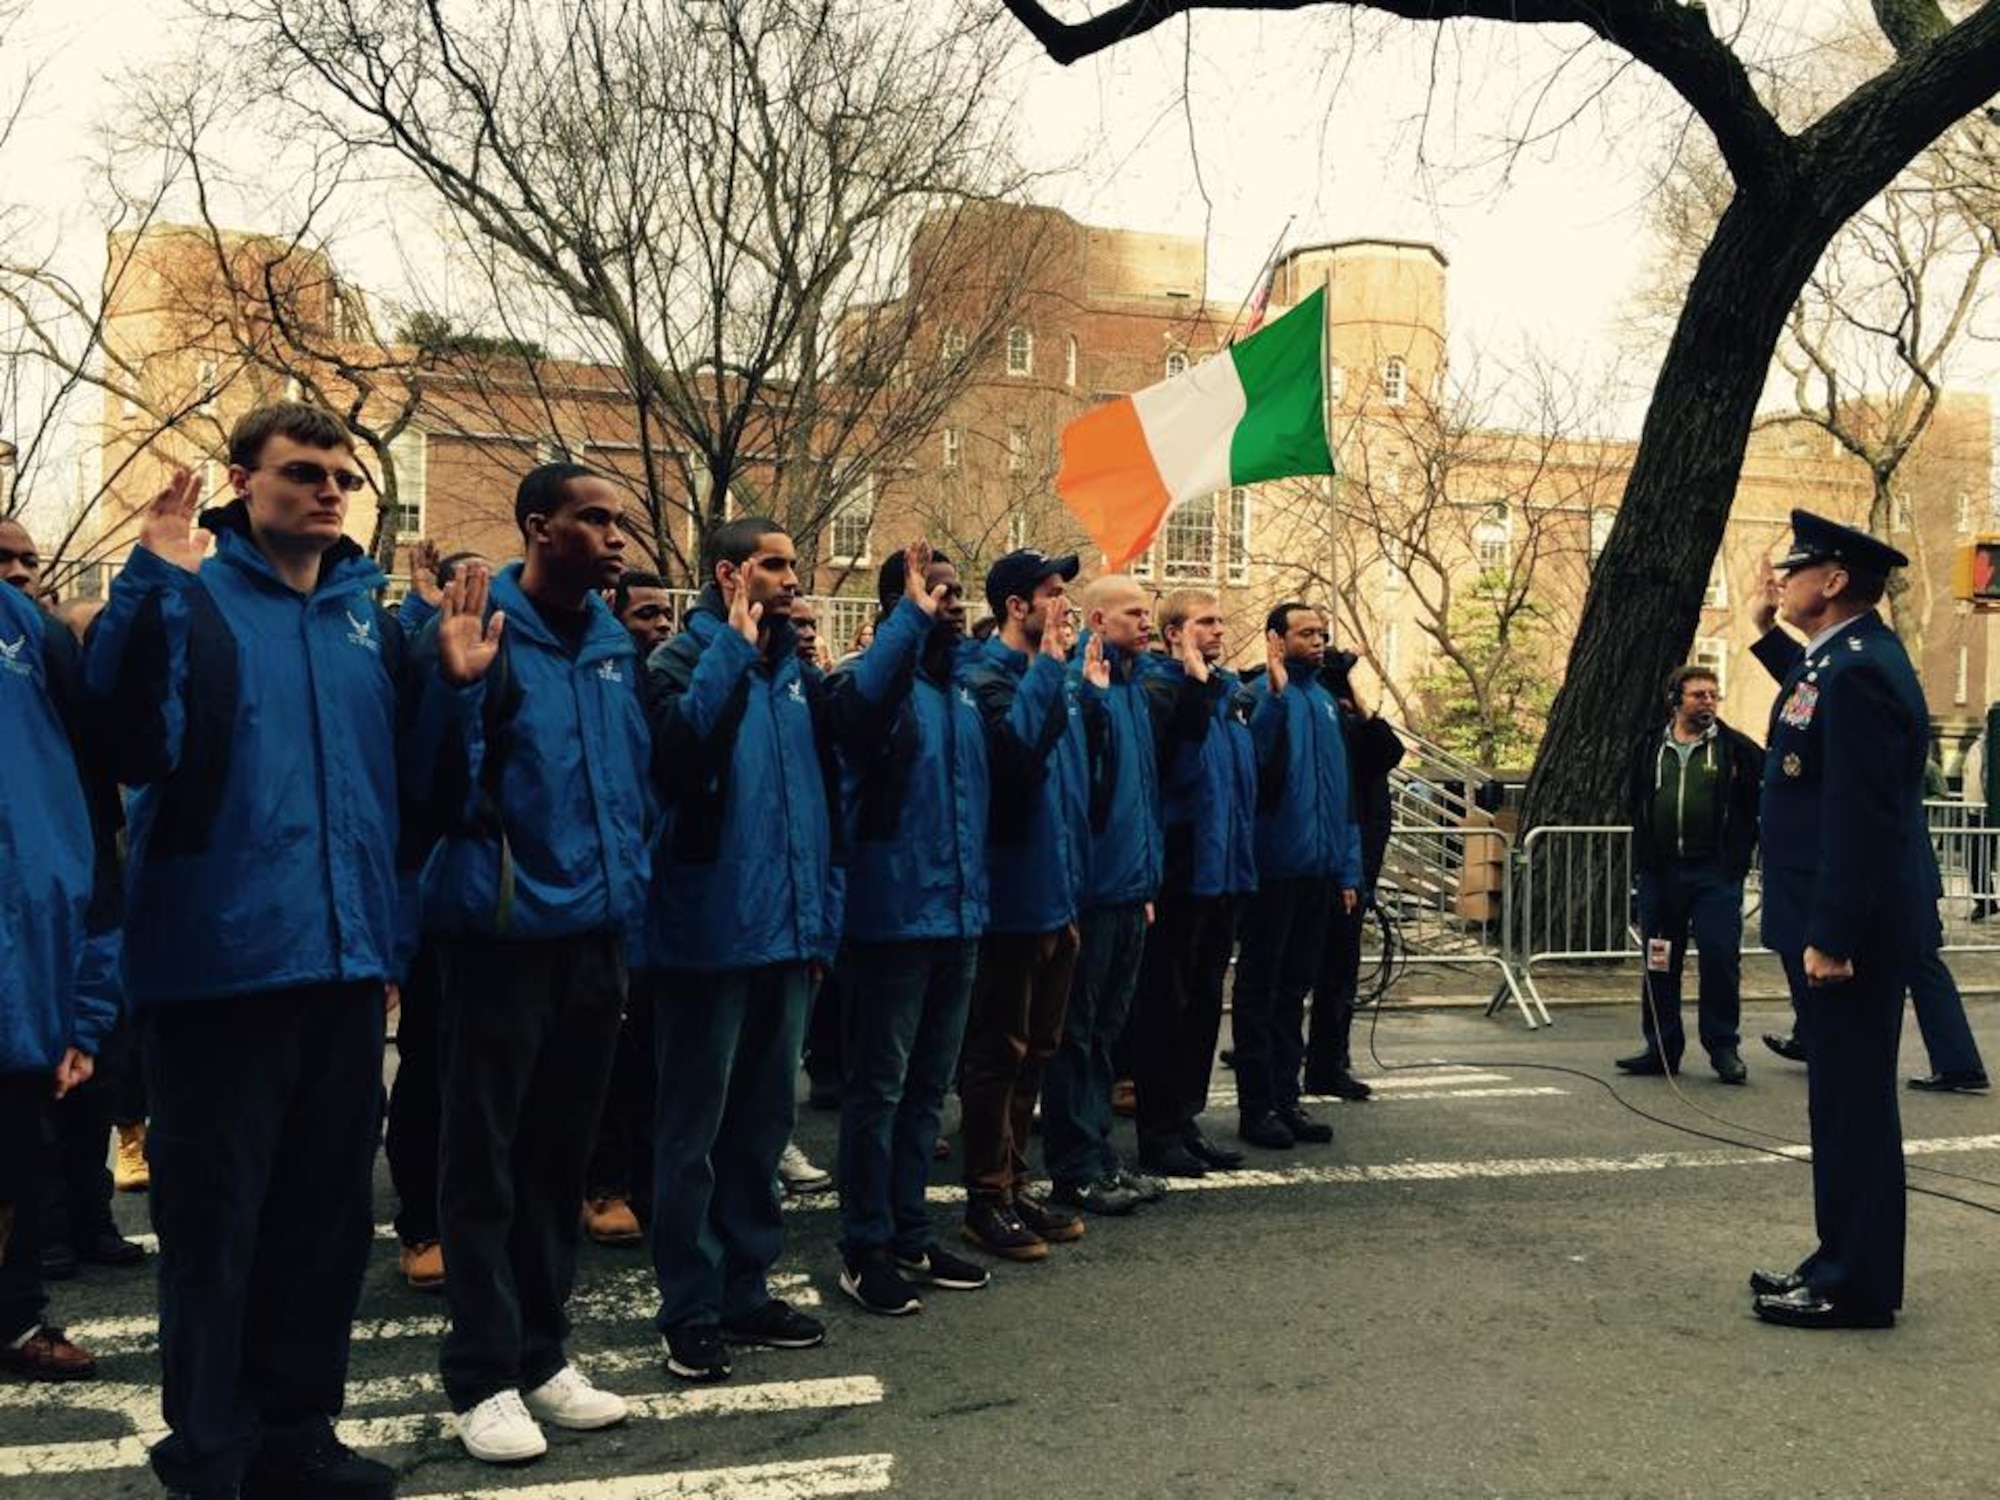 Air Force District of Washington Commander Maj. Gen. Darryl Burke administers the Oath of Enlistment to a group of future Airmen in the Delayed Entry Program at the St Patrick's Day Parade in New York City March 17, 2015. (U.S. Air Force photo)